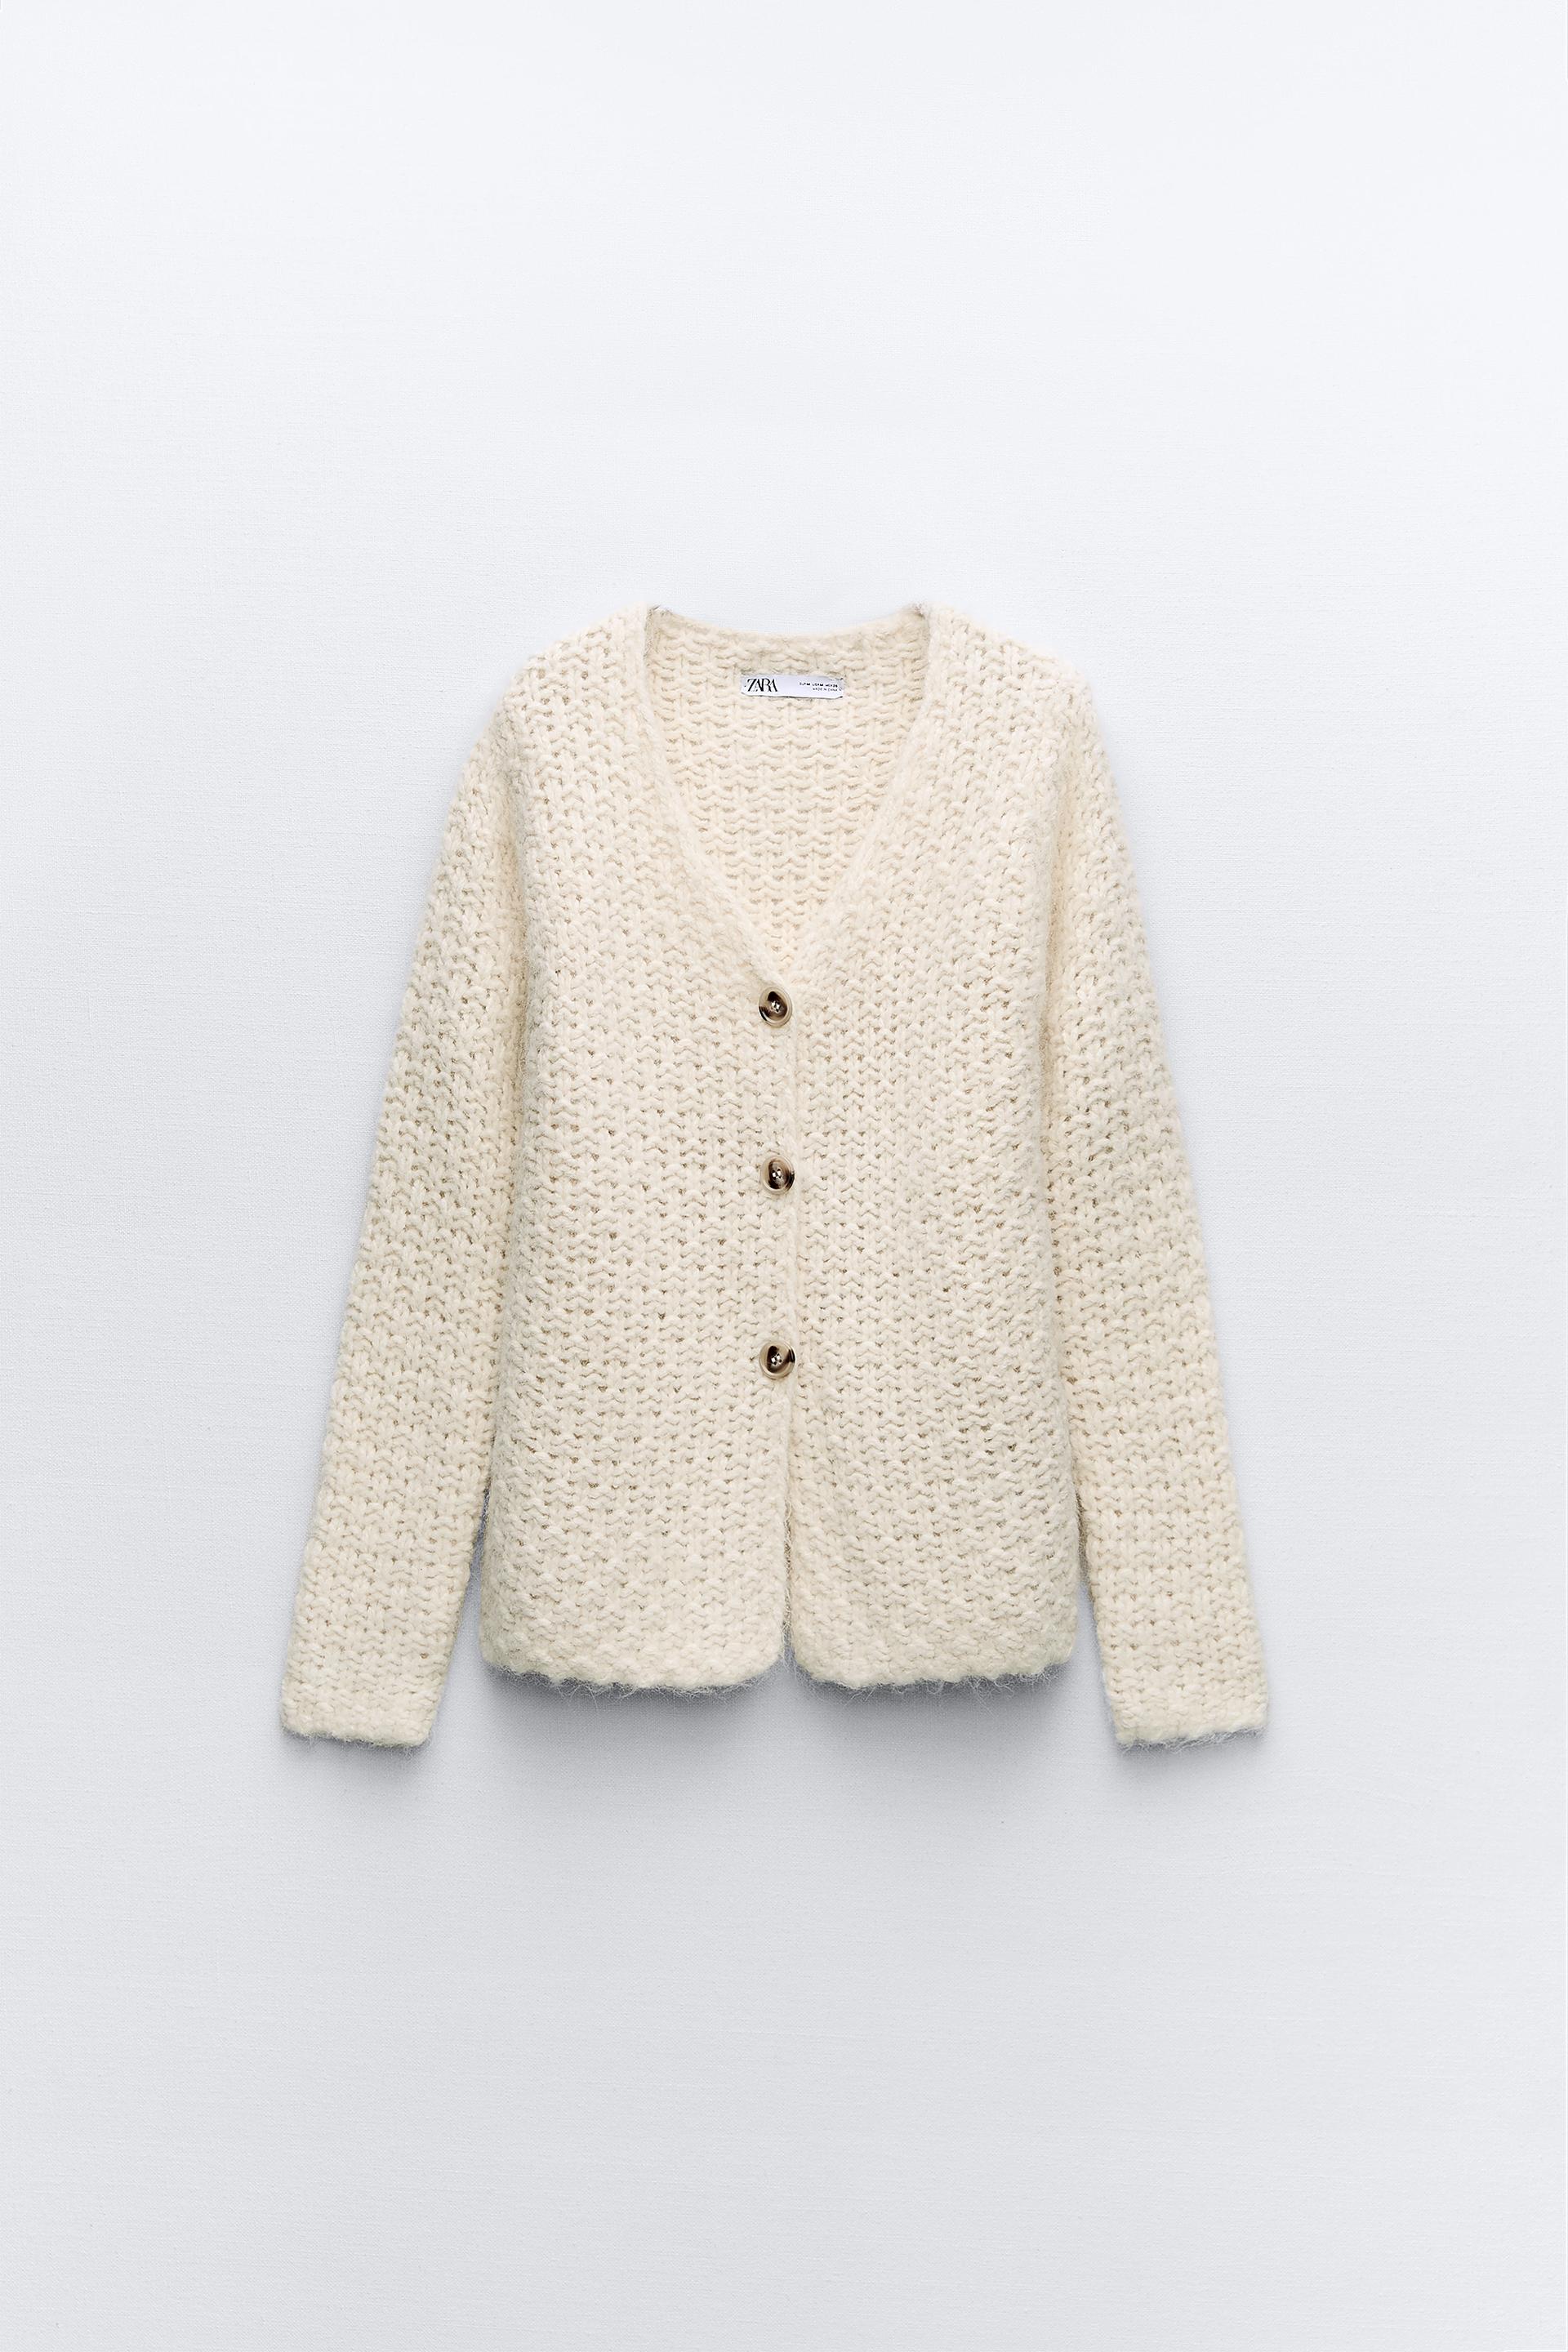 STRUCTURED KNIT CARDIGAN